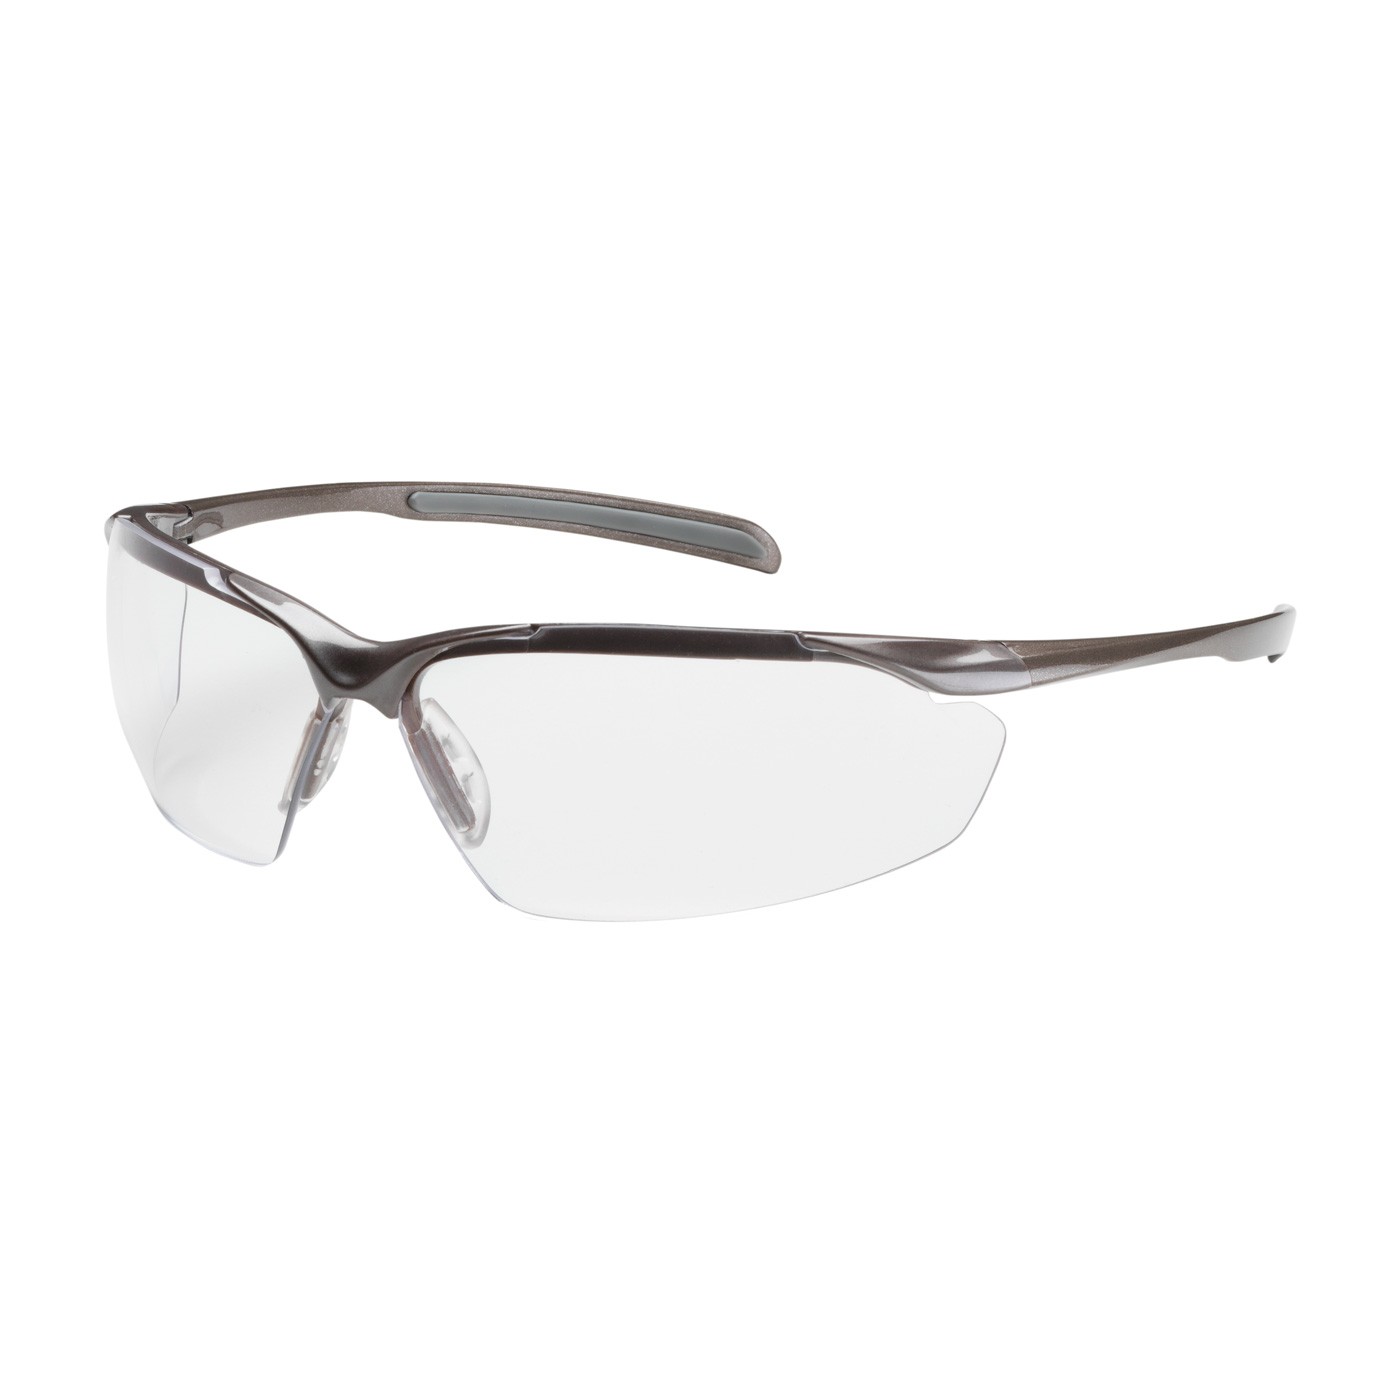 Commander™ Semi-Rimless Safety Glasses with Gloss Bronze Frame, Clear Lens and Anti-Scratch / Anti-Reflective Coating  (#250-33-1010)